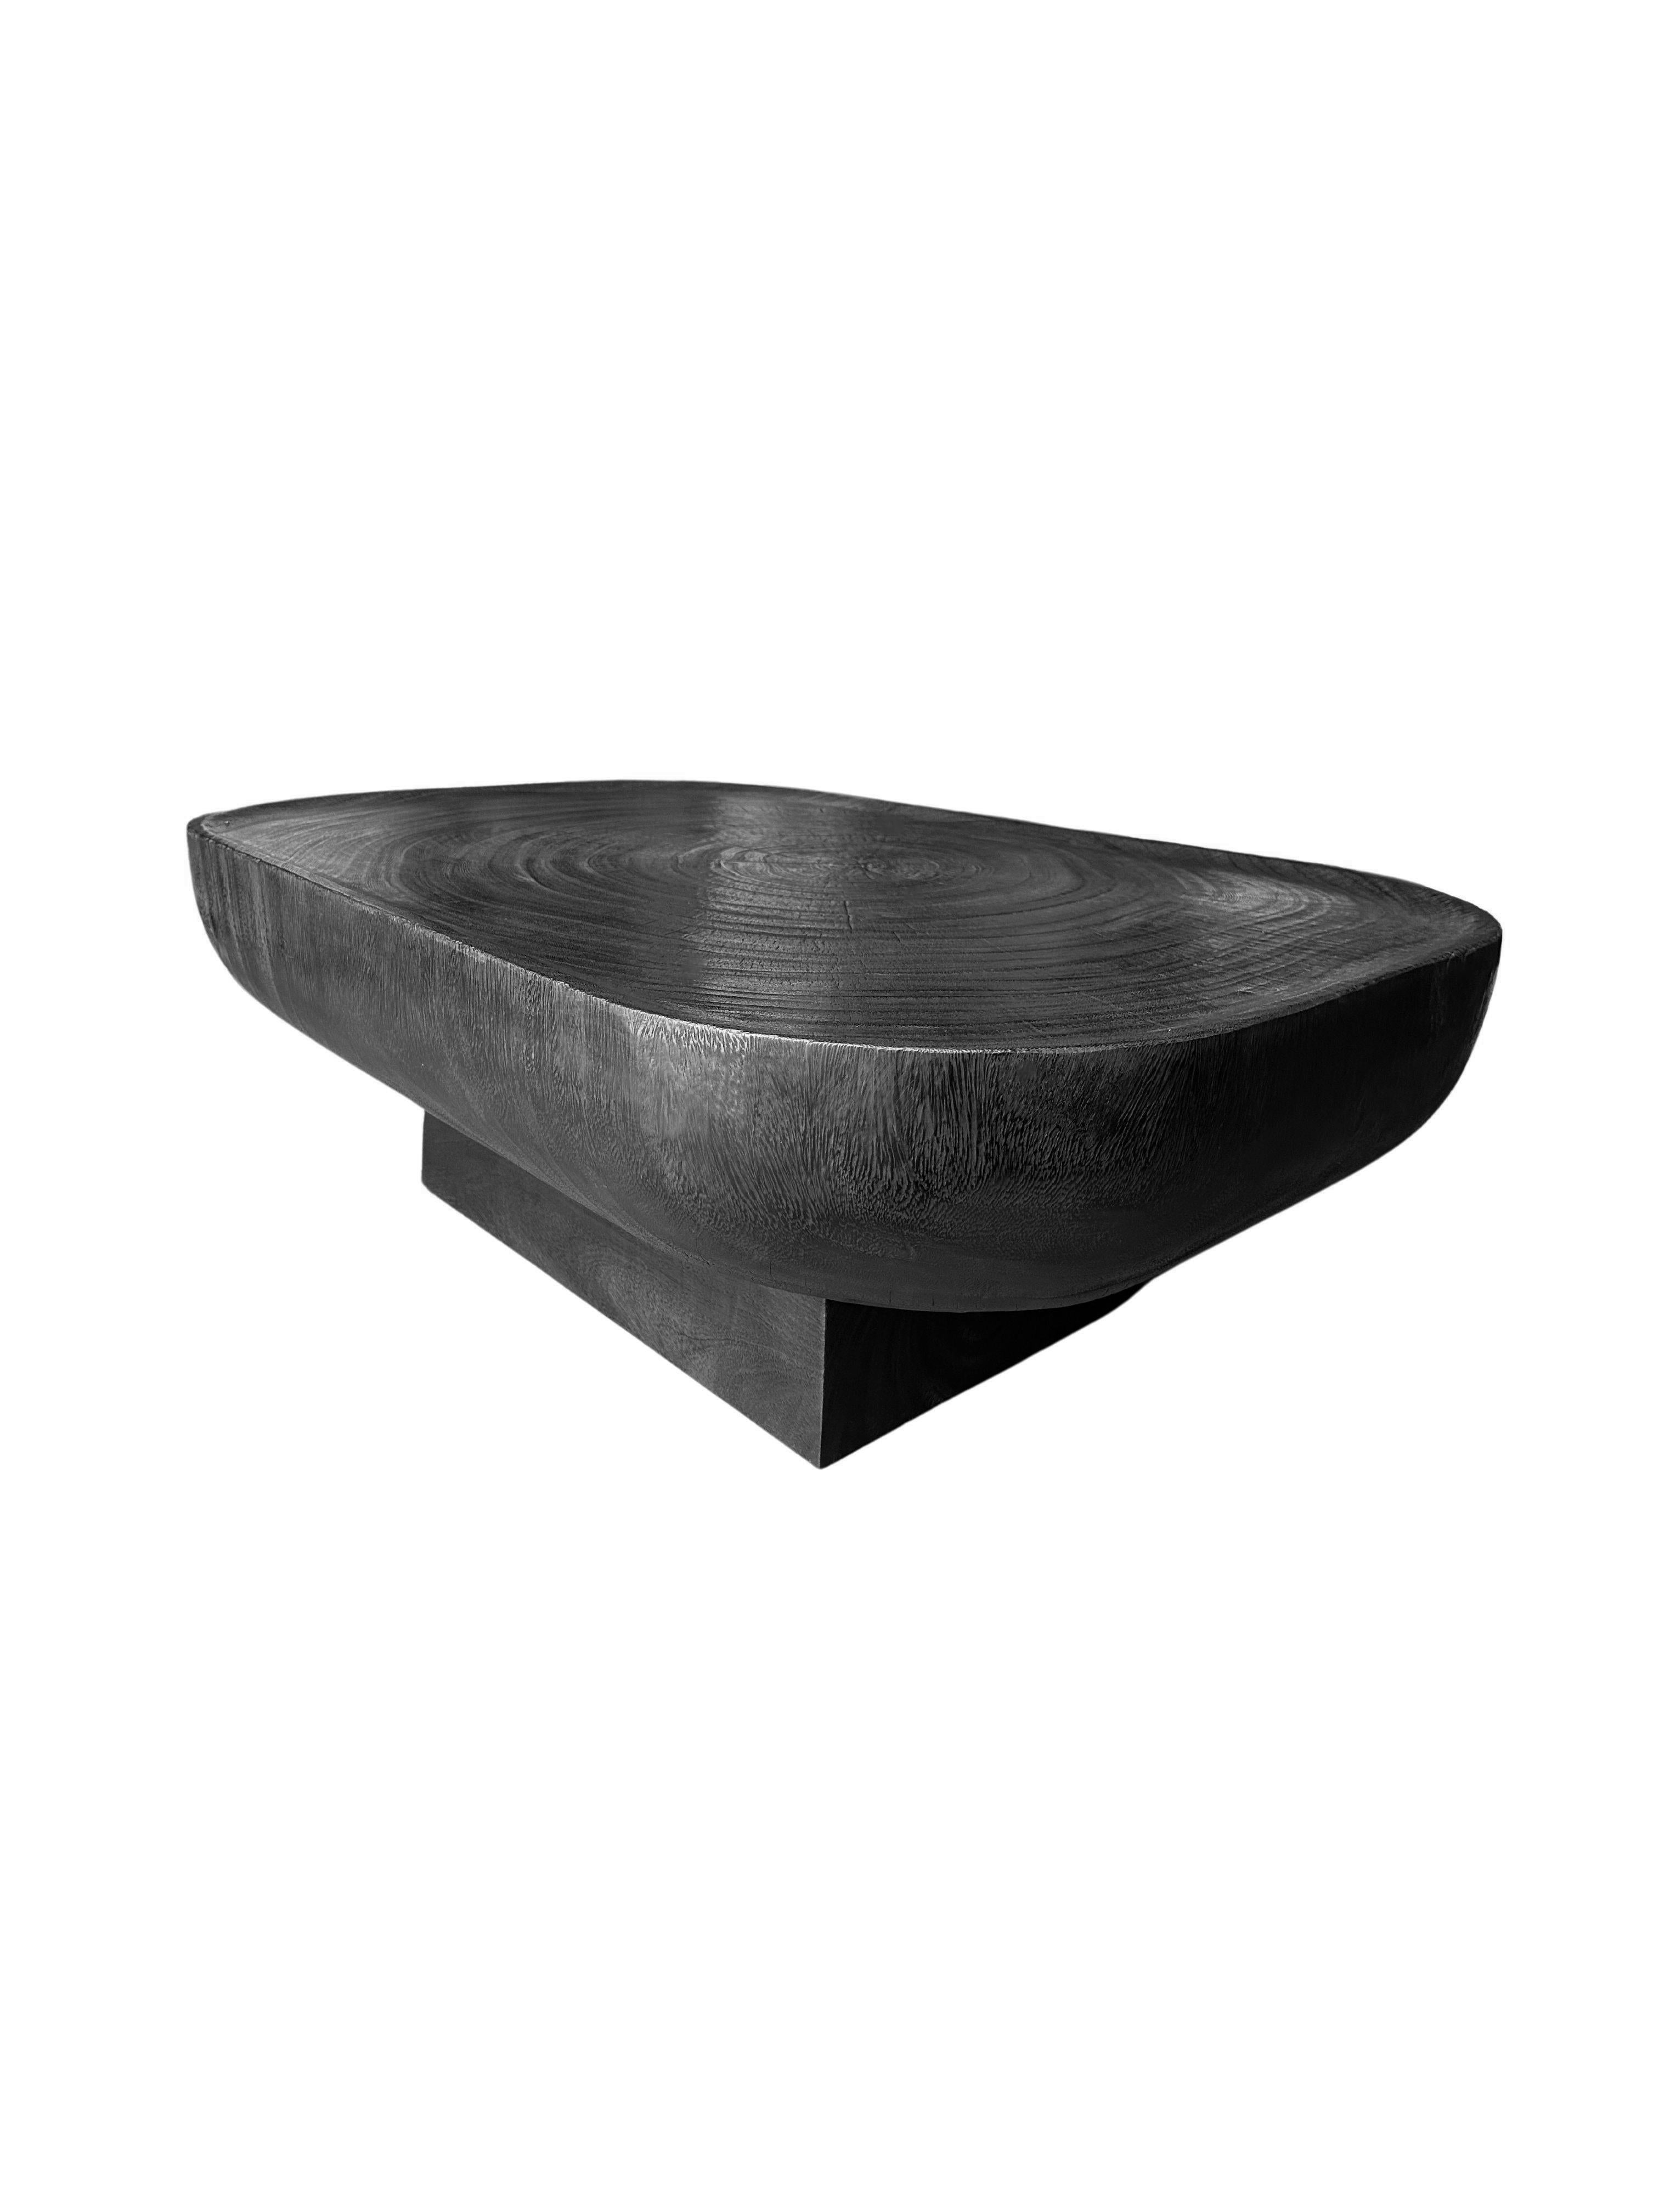 Hand-Crafted Solid Sculptural Suar Wood Table, Burnt Finish, Modern Organic For Sale